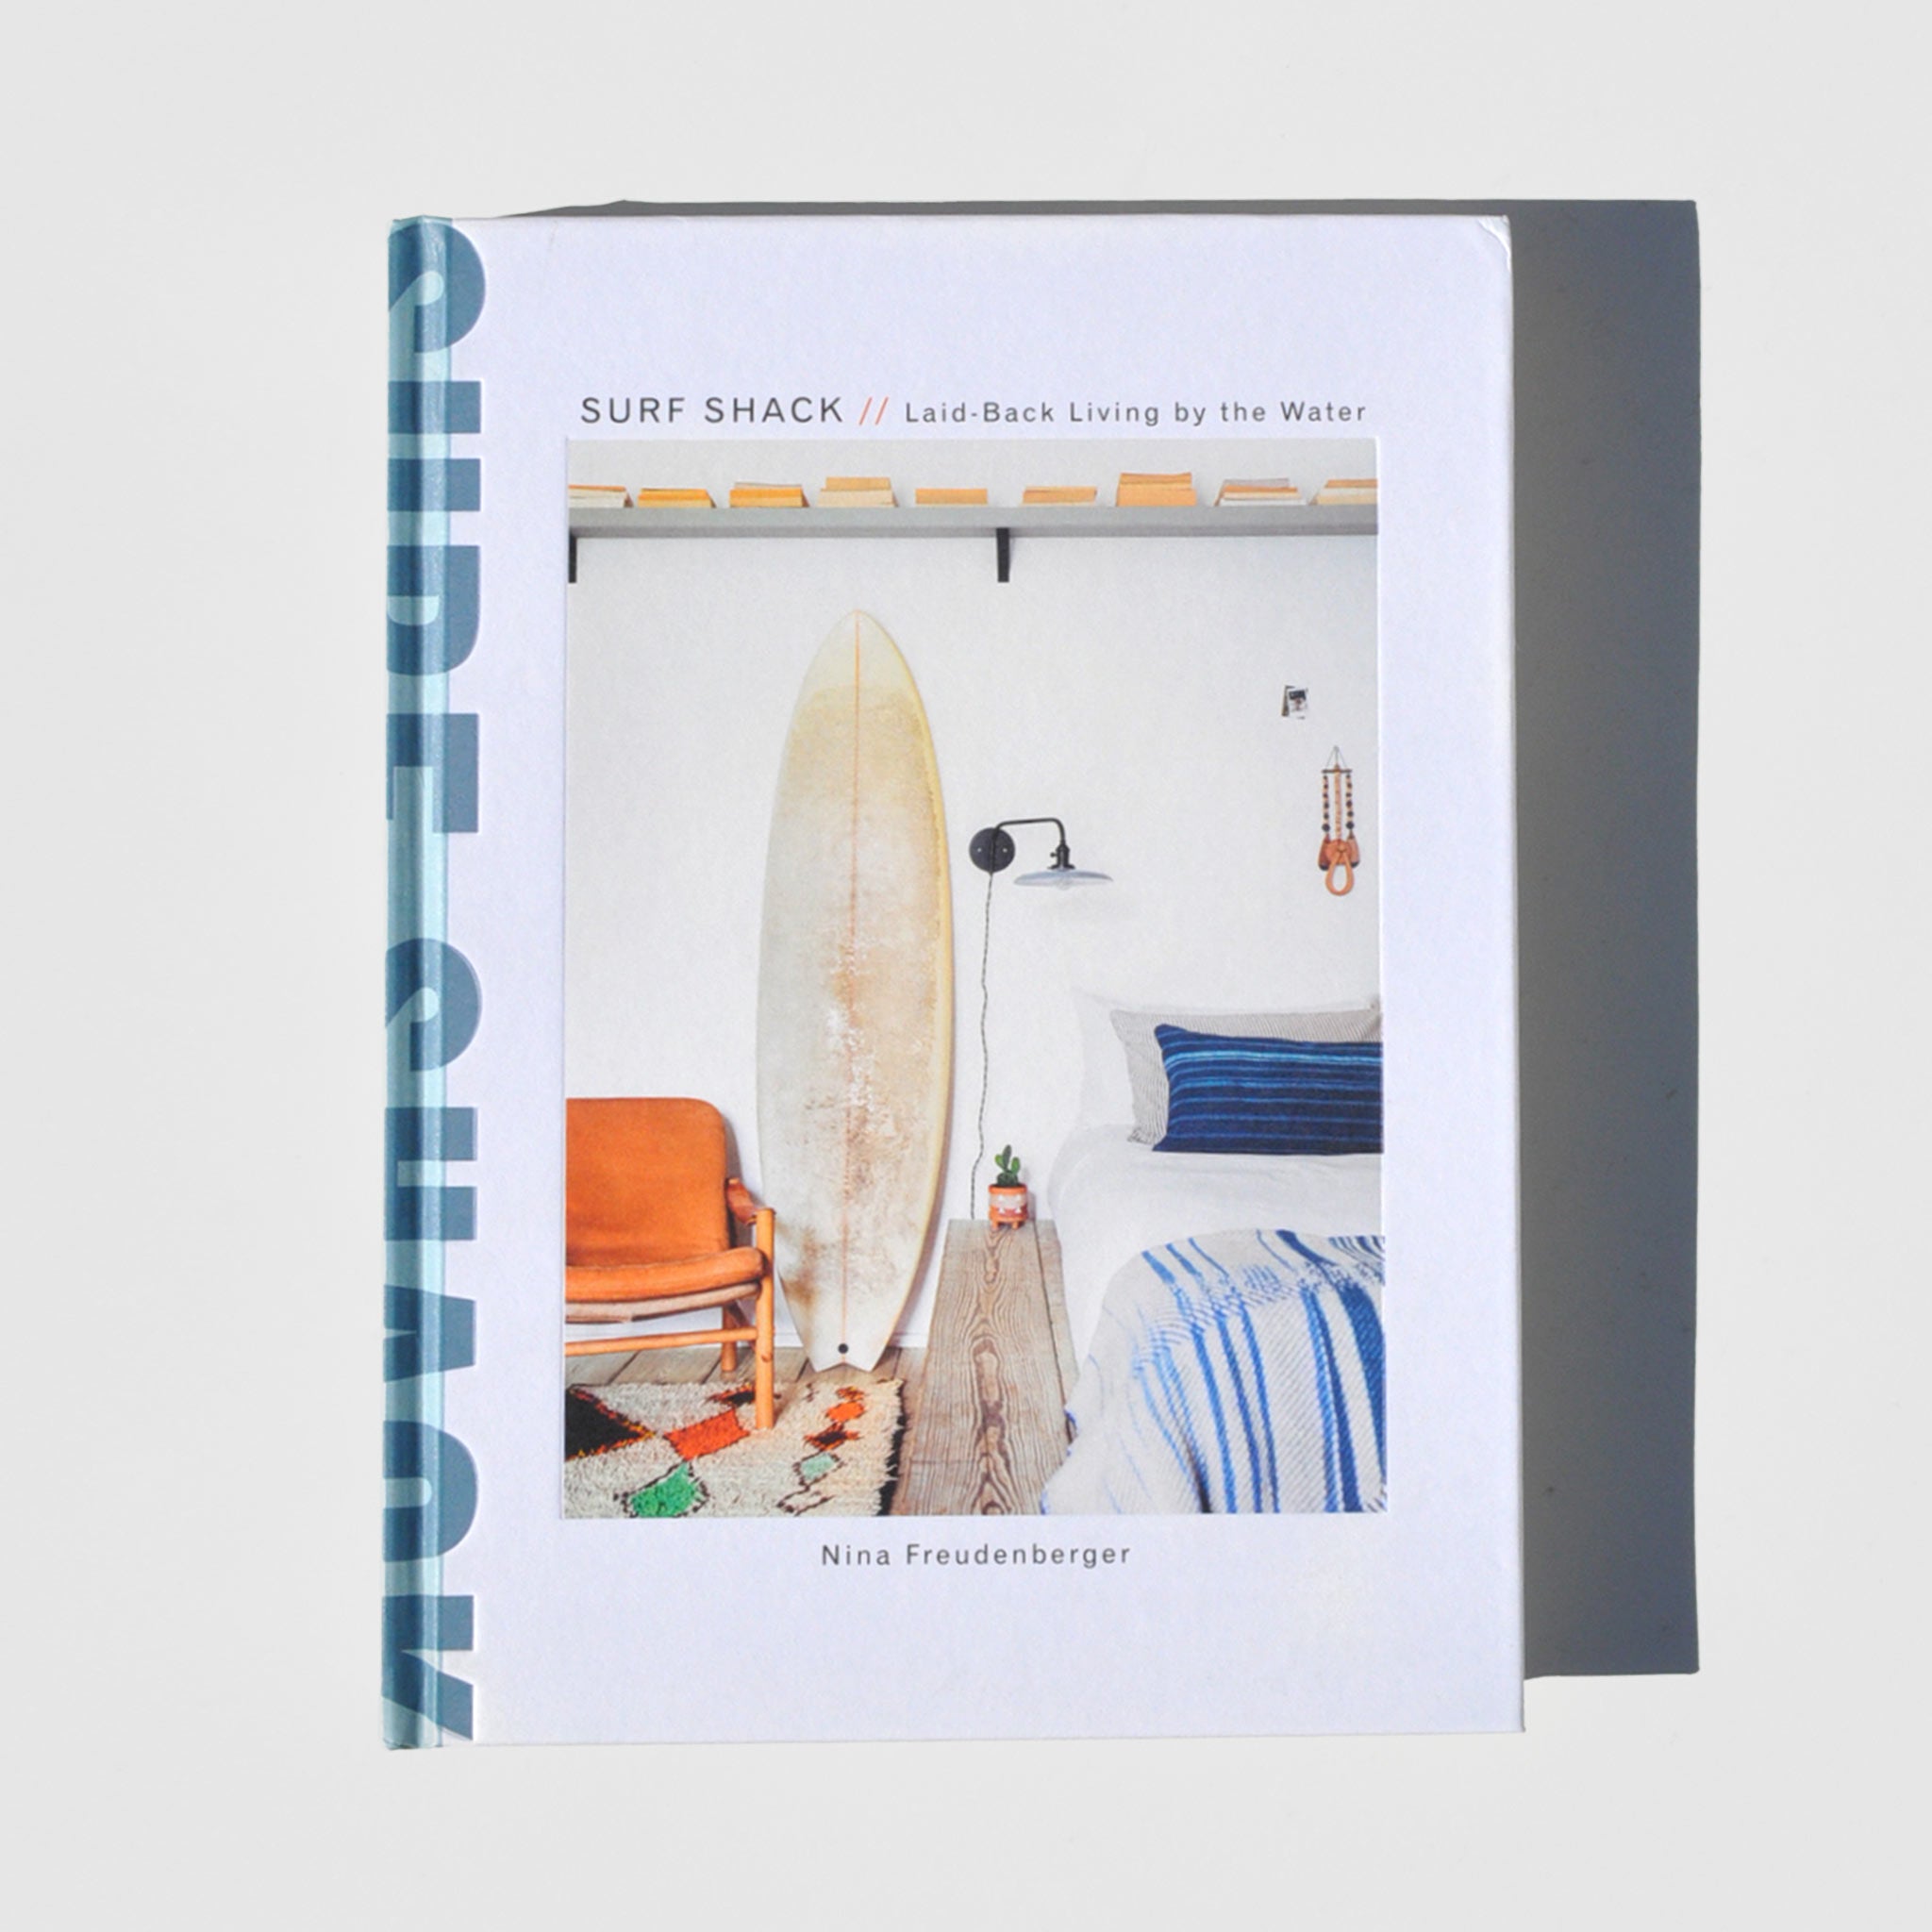 Flat image of surf shack laid back living by the water book.